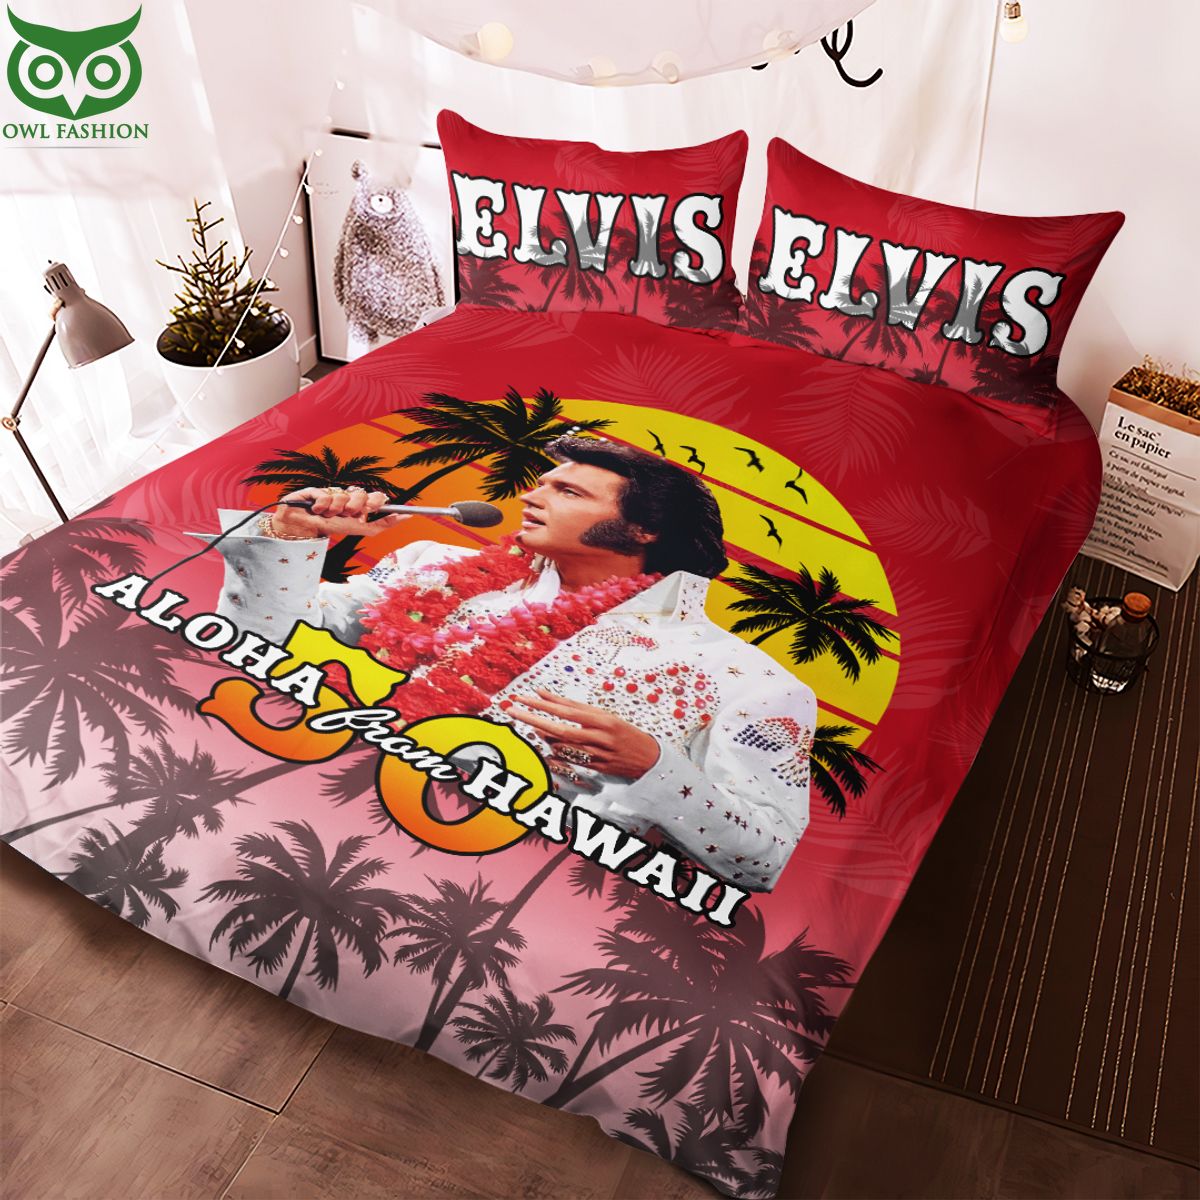 Elvis Presley Aloha From Hawaii Bedding set Such a charming picture.